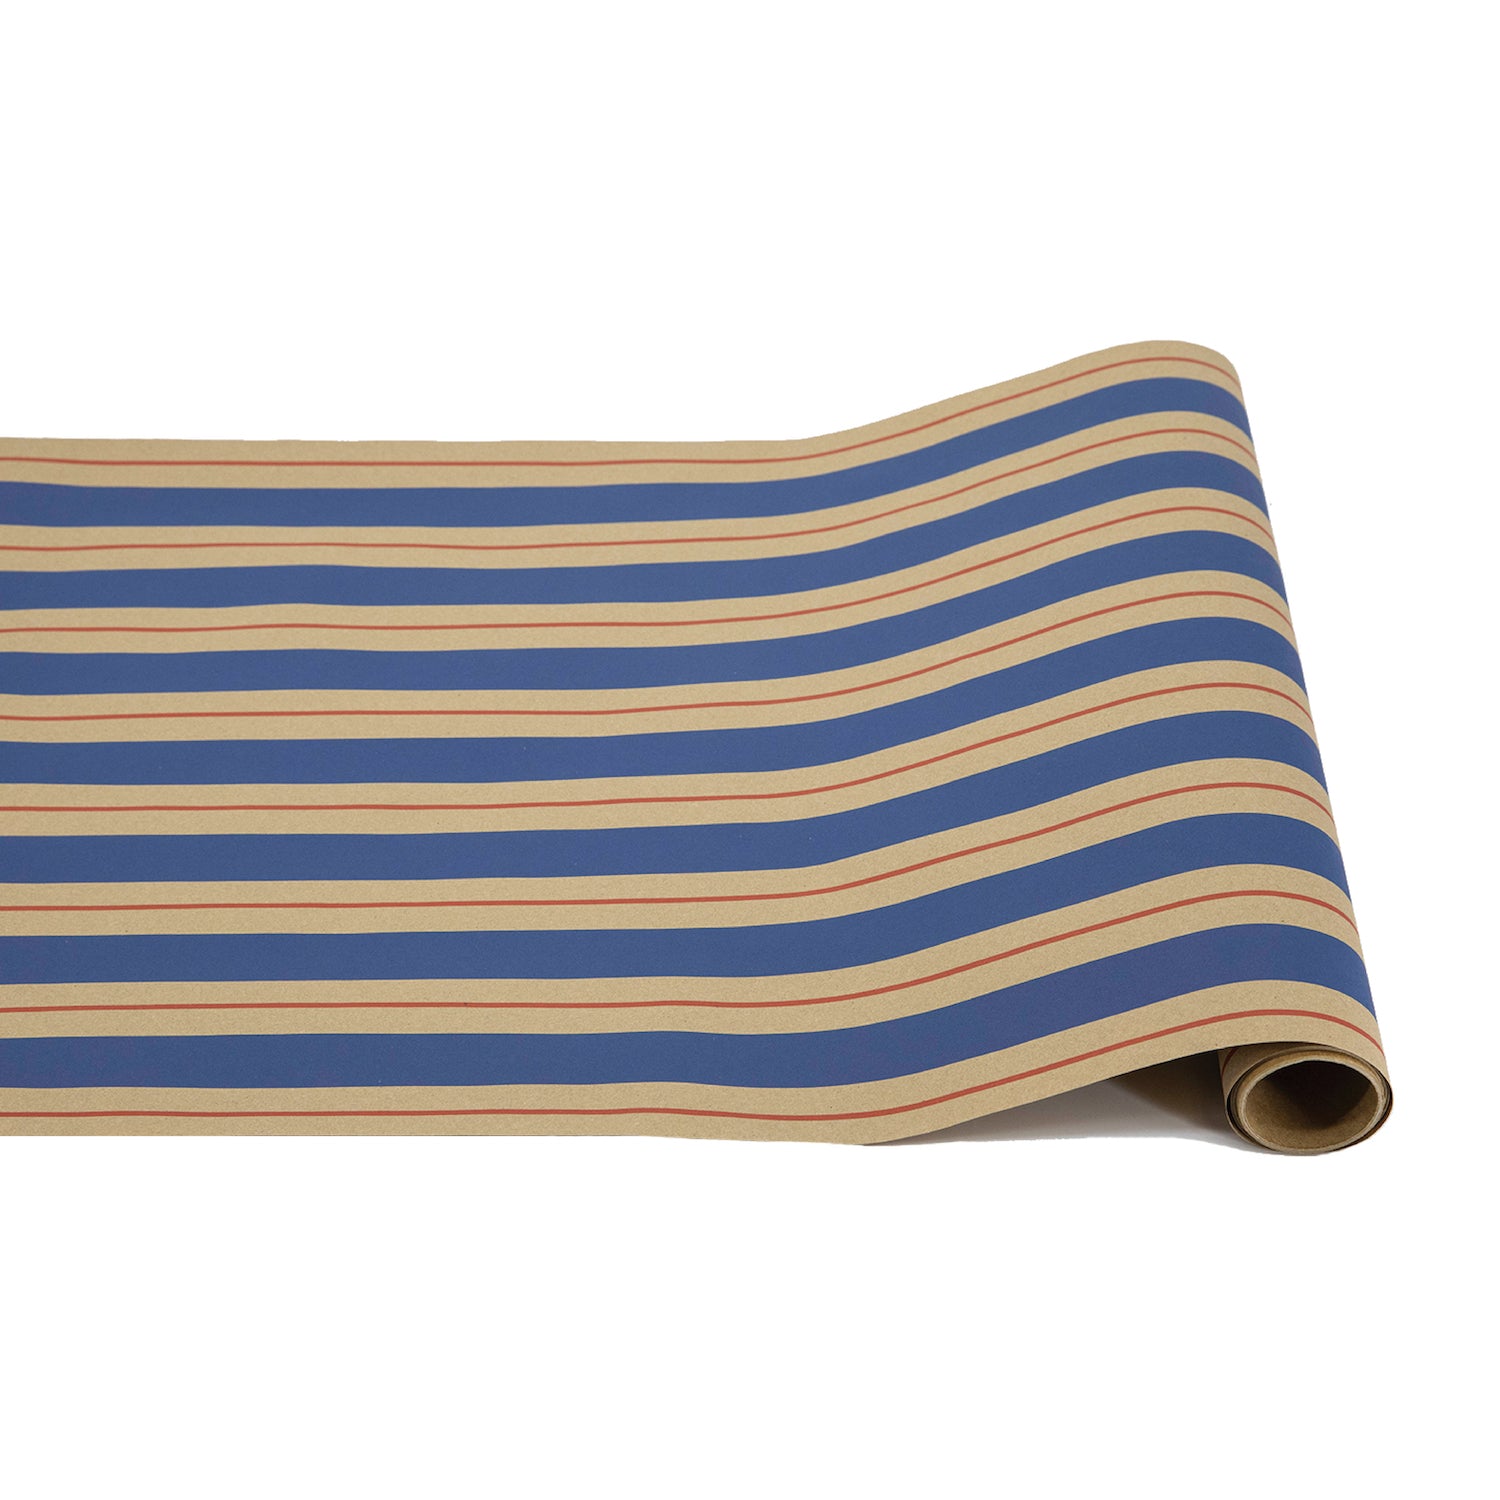 This entertaining Kraft Navy &amp; Red Awning Stripe Runner from Hester &amp; Cook features a stylish blue and tan striped design.